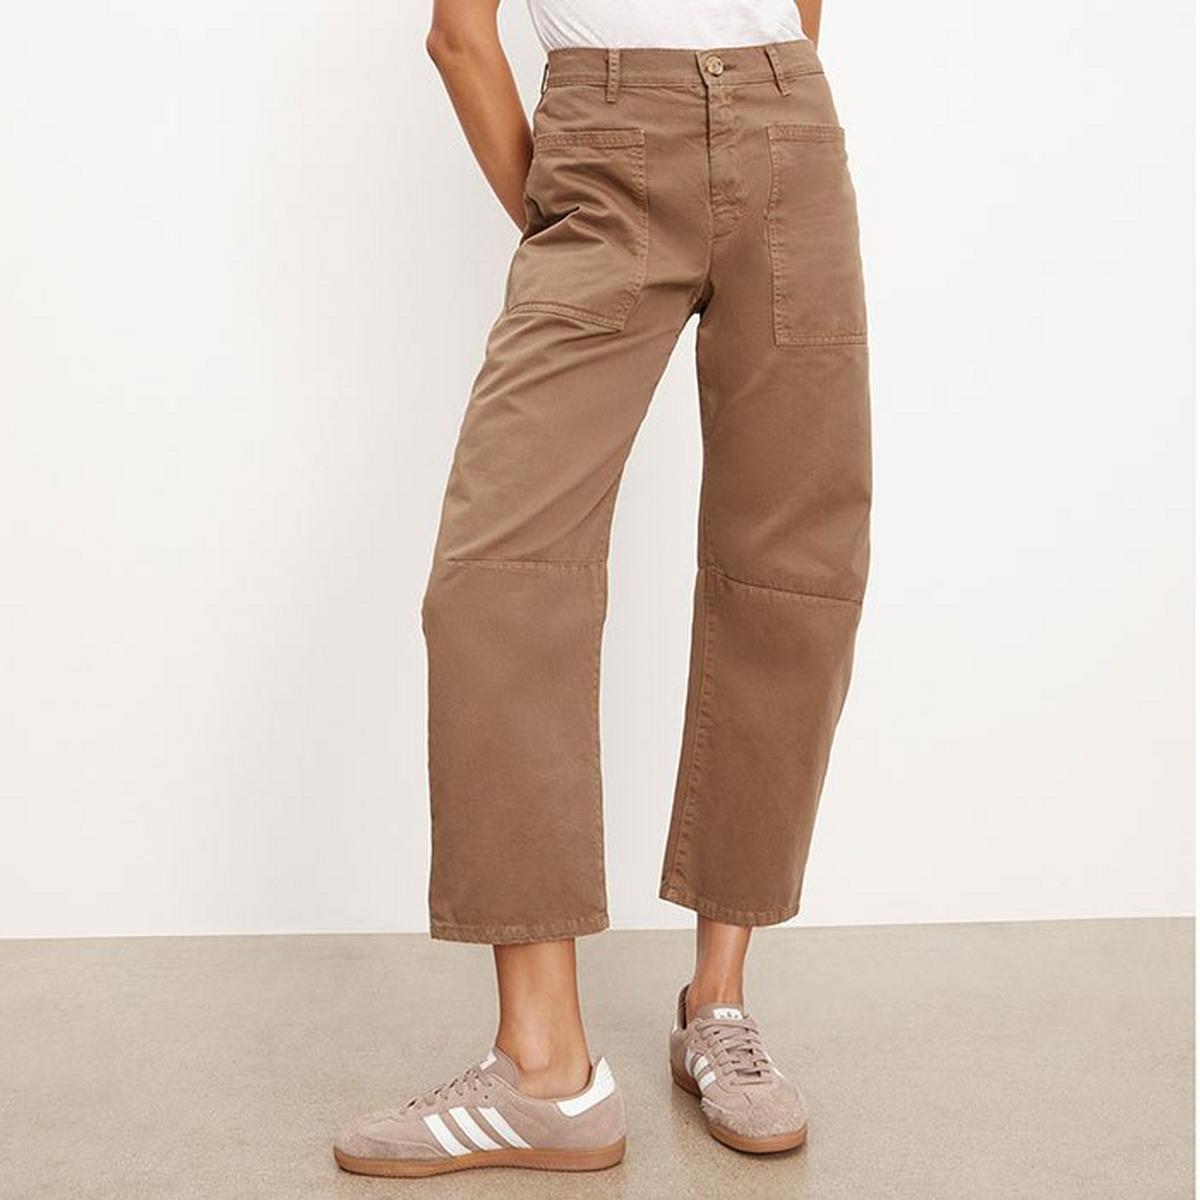 Women's Brylie Sanded Twill Utility Pant